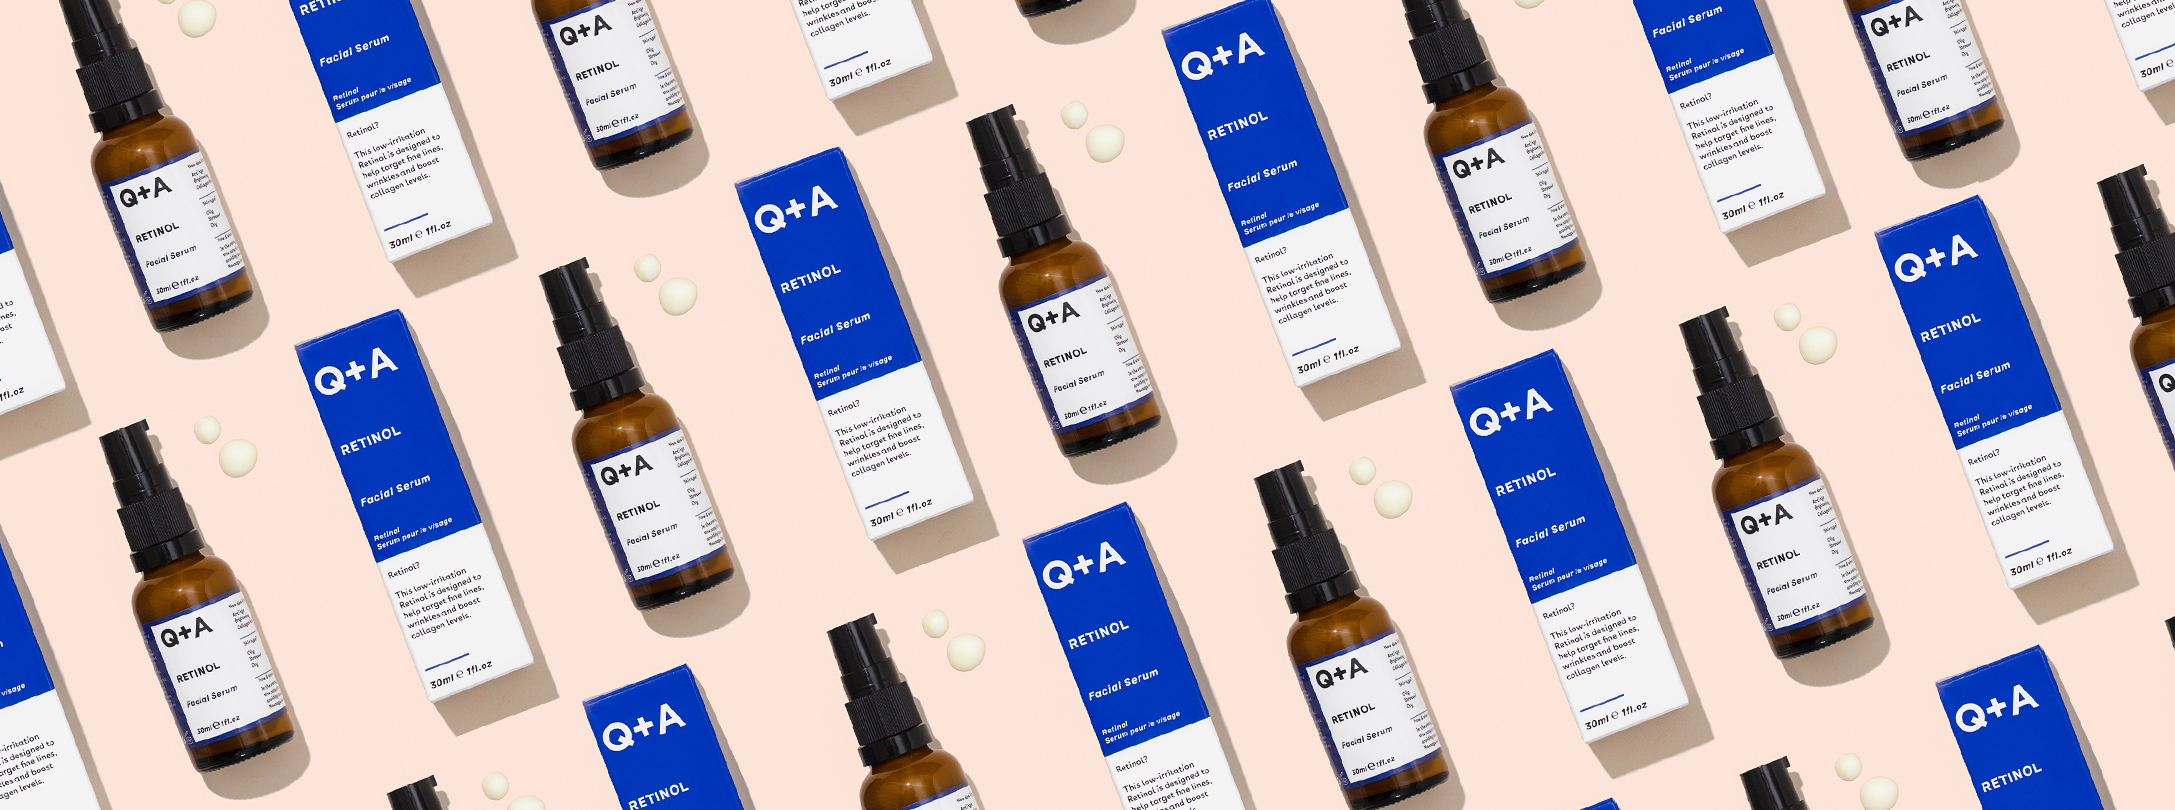 Q+A New In Products